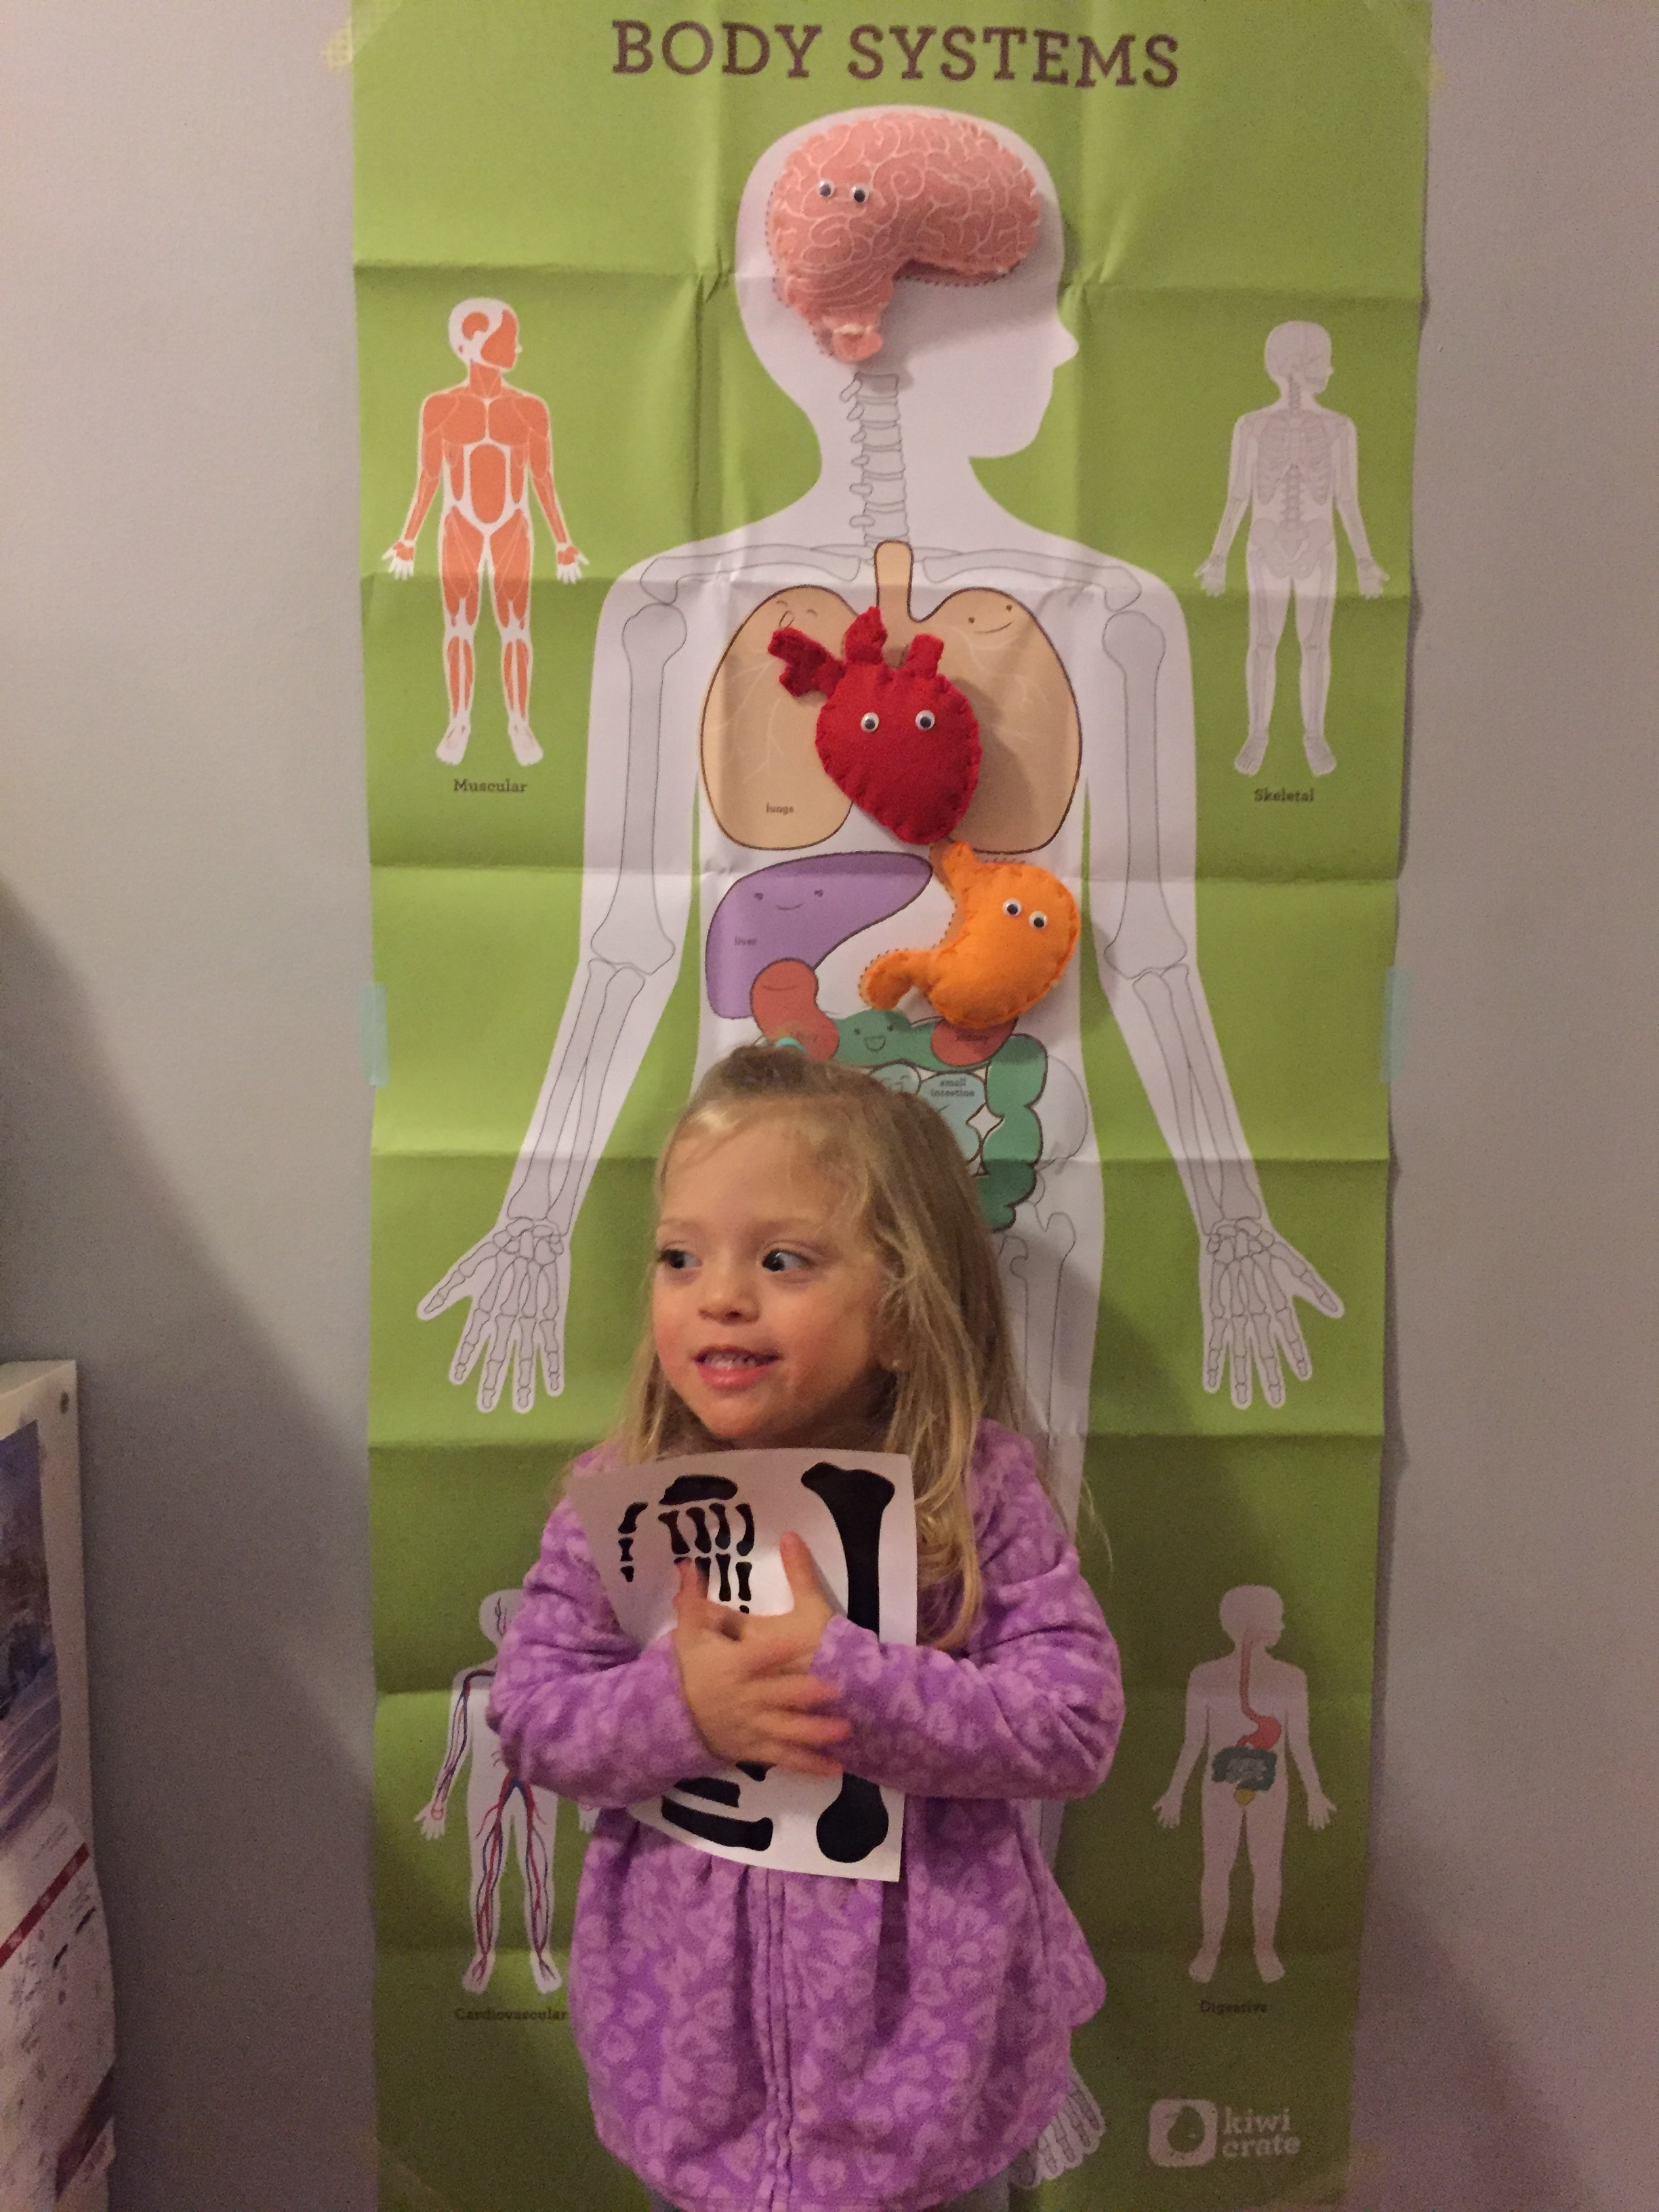  For Christmas, we got a 6-Month subscription for Lucie to these activity themed boxes called Kiwi Crates. The first month was about Body Systems, and came with a body poster, stuffed organs and glow-in-the dark X-Ray stickers! 